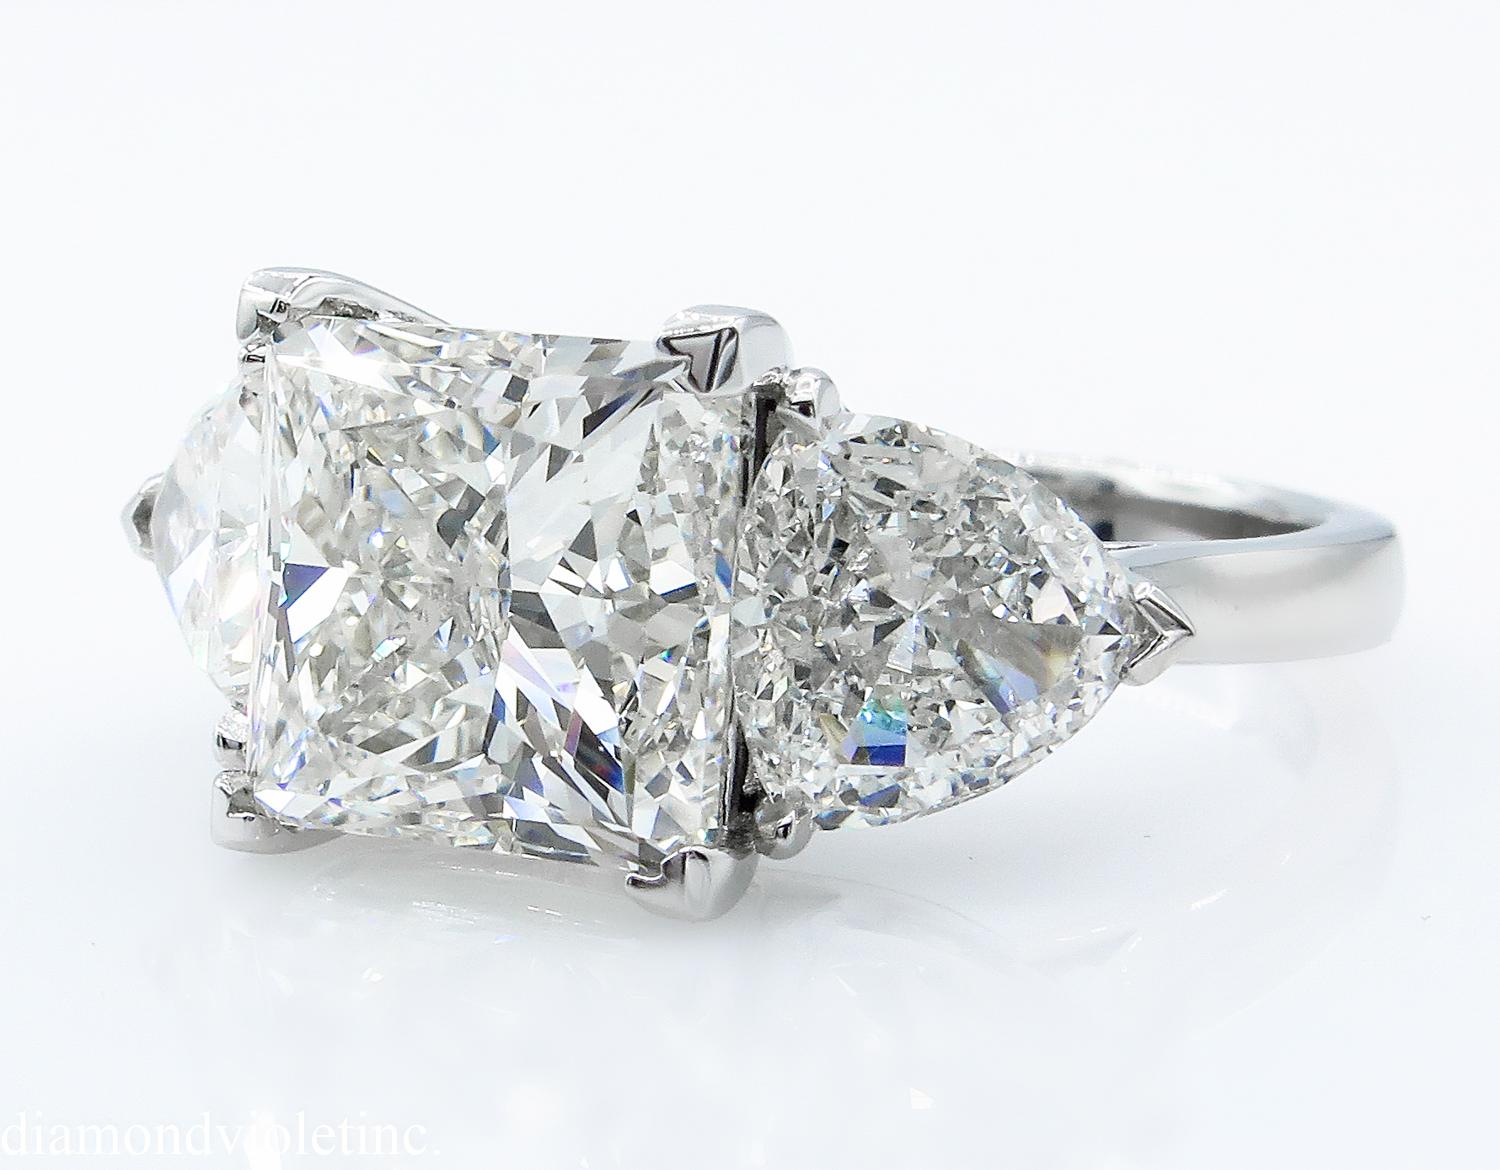 A Breathtaking Estate HANDMADE PLATINUM (stamped) Princess cut Diamond Three-Stone Engagement ring. The Square Prong Set Princess Diamond is 4.52CT with measurements of 8.86x8.64x6.48mm; GIA Certified as L color and SI1 clarity (Appears Warm White